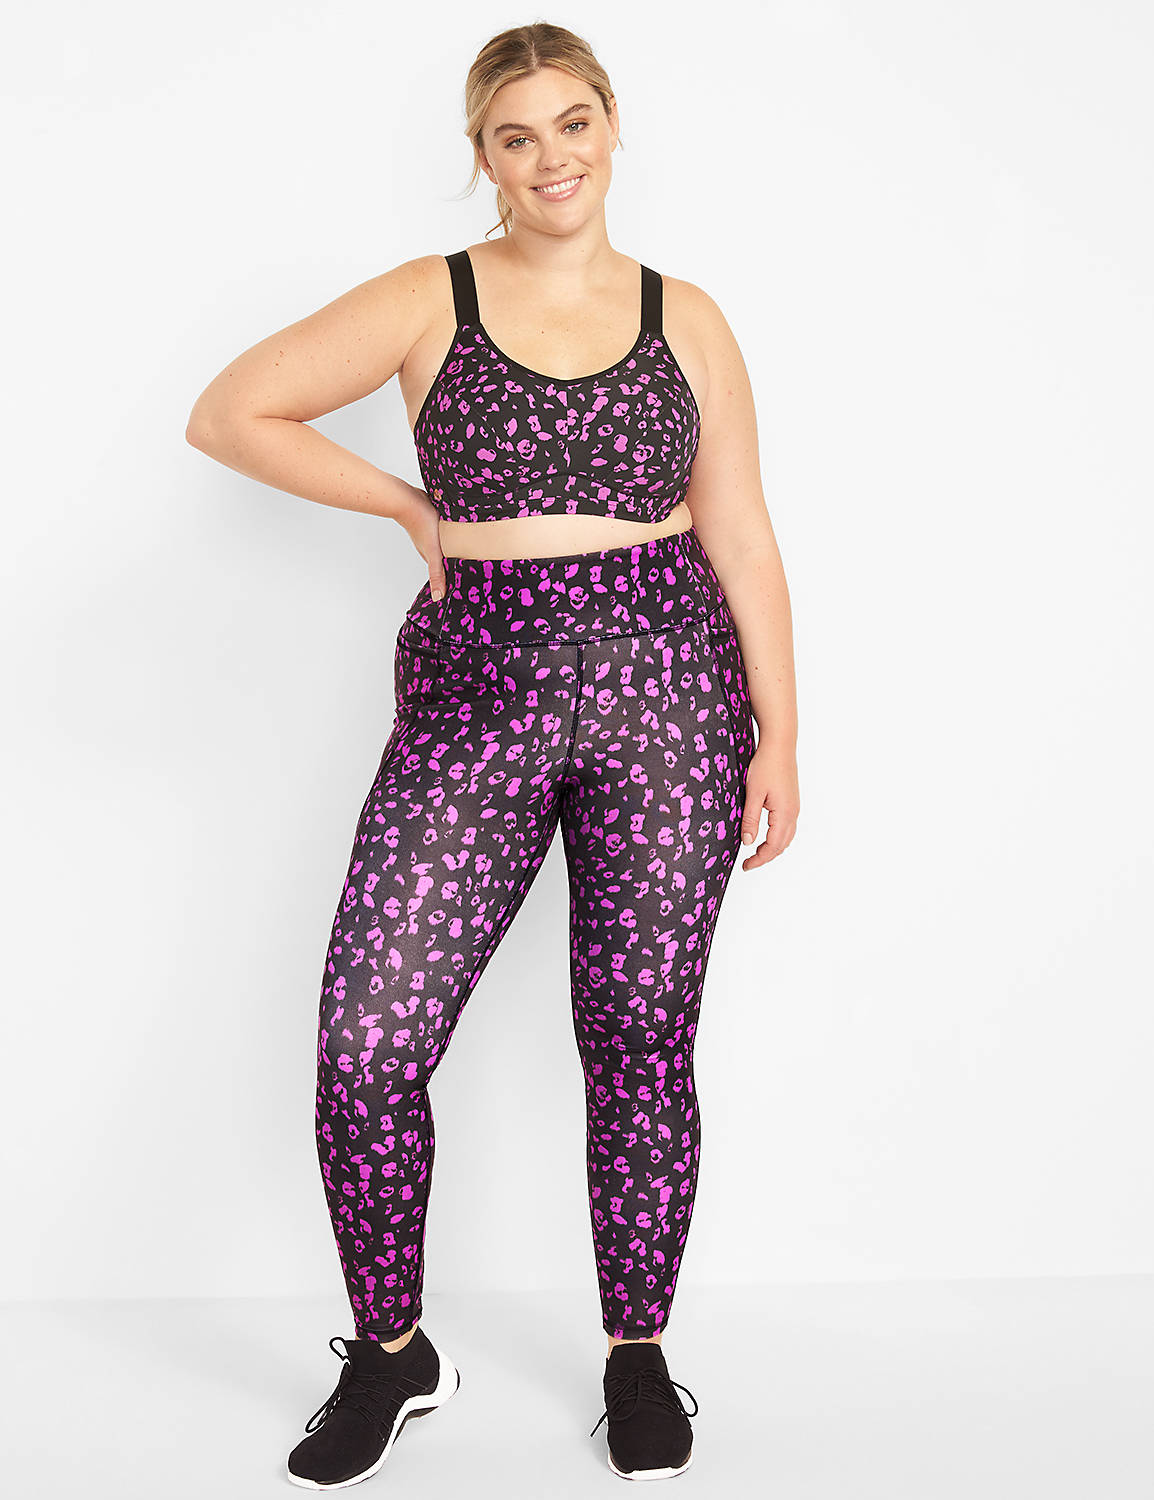 LIVI High Rise Wicking 7/8 Legging Strappy Hem Detail S 1124195:LBH21094_FloralRushSmall_V2_CW2:22/24 Product Image 3